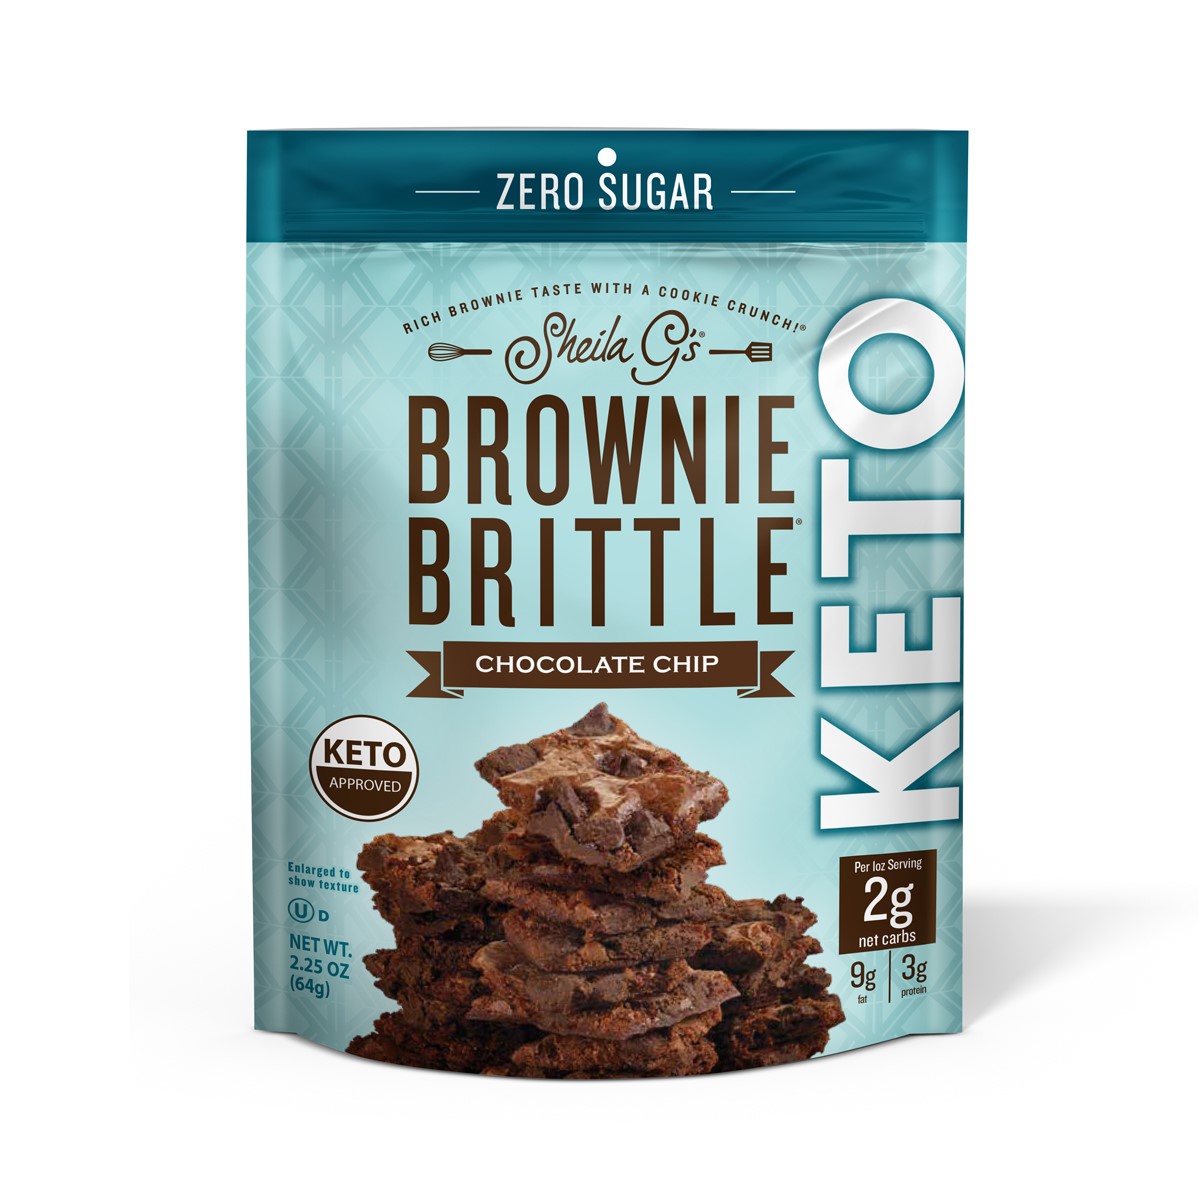 Consumer Product Keto Brownie Brittle